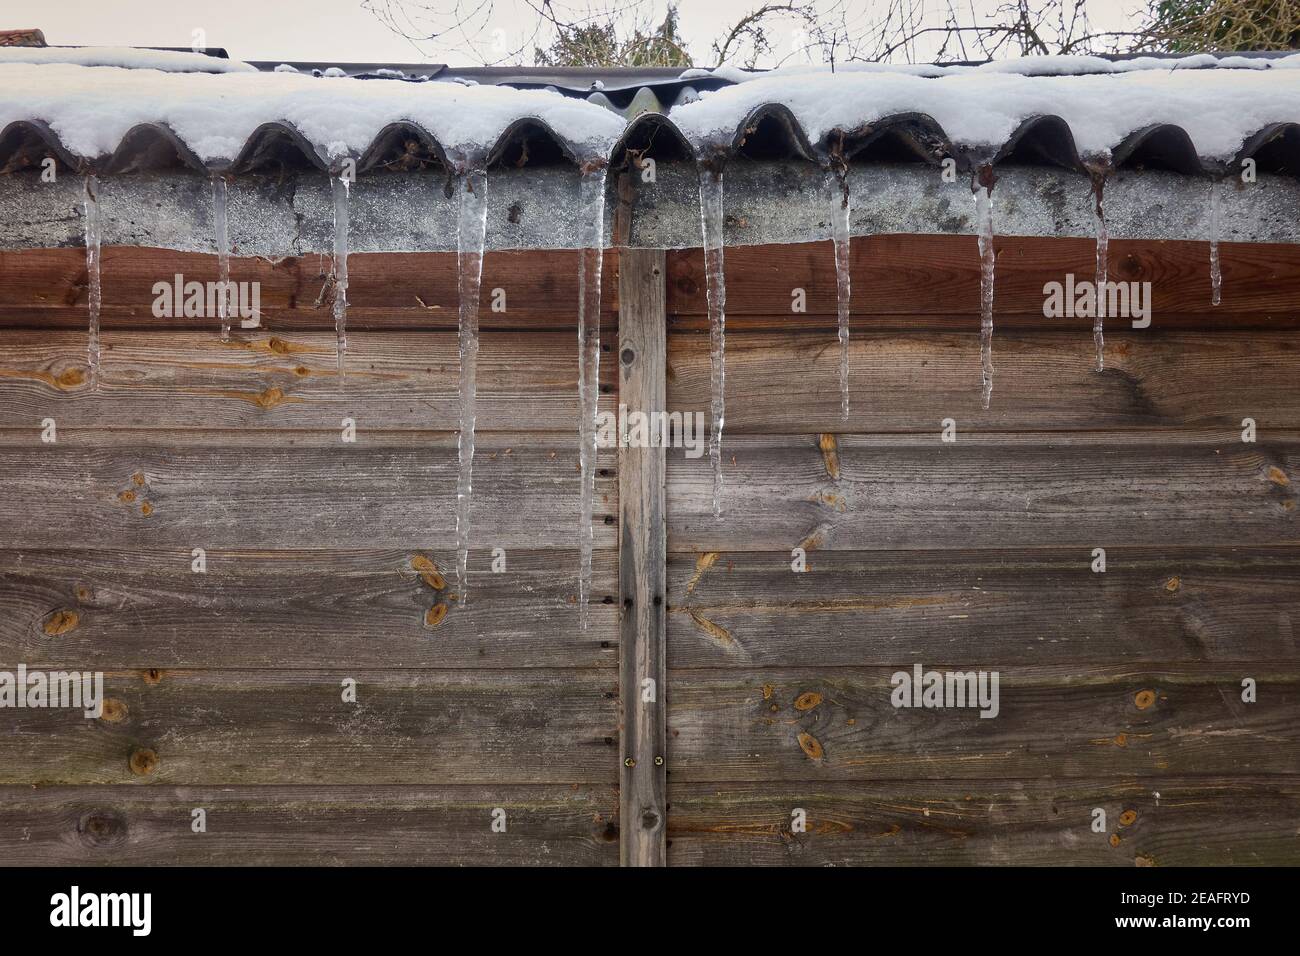 Large frozen icicles hanging of the side of a corrugated garden shed roof during cold winters conditions in February 2021 Lincolnshire UK Stock Photo